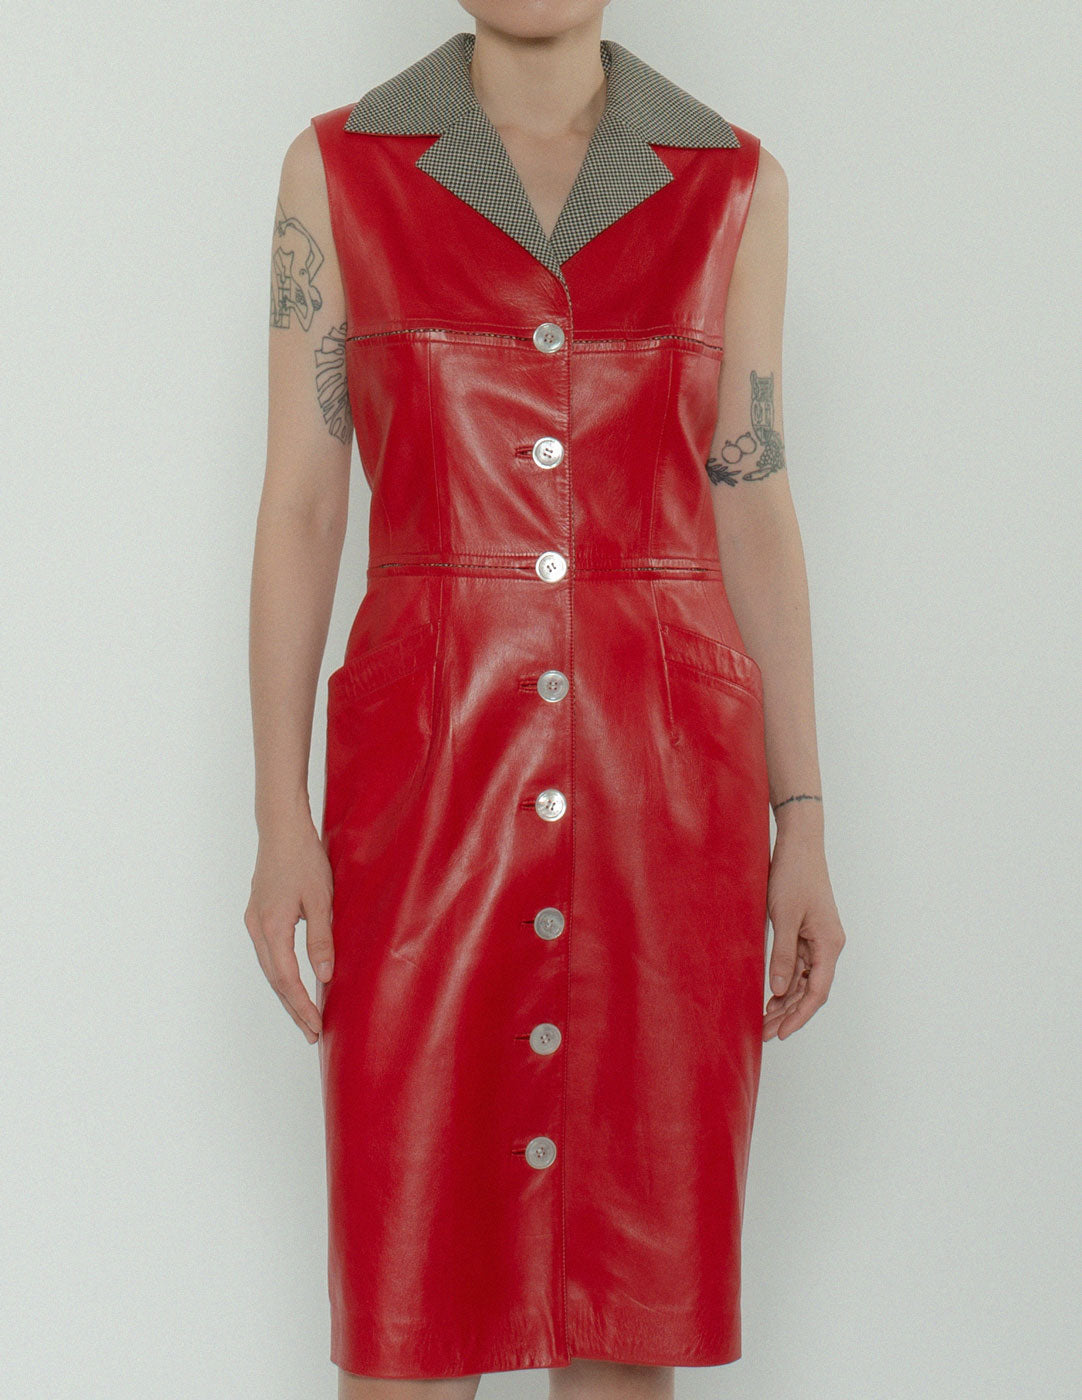 Loewe vintage buttoned leather dress front detail